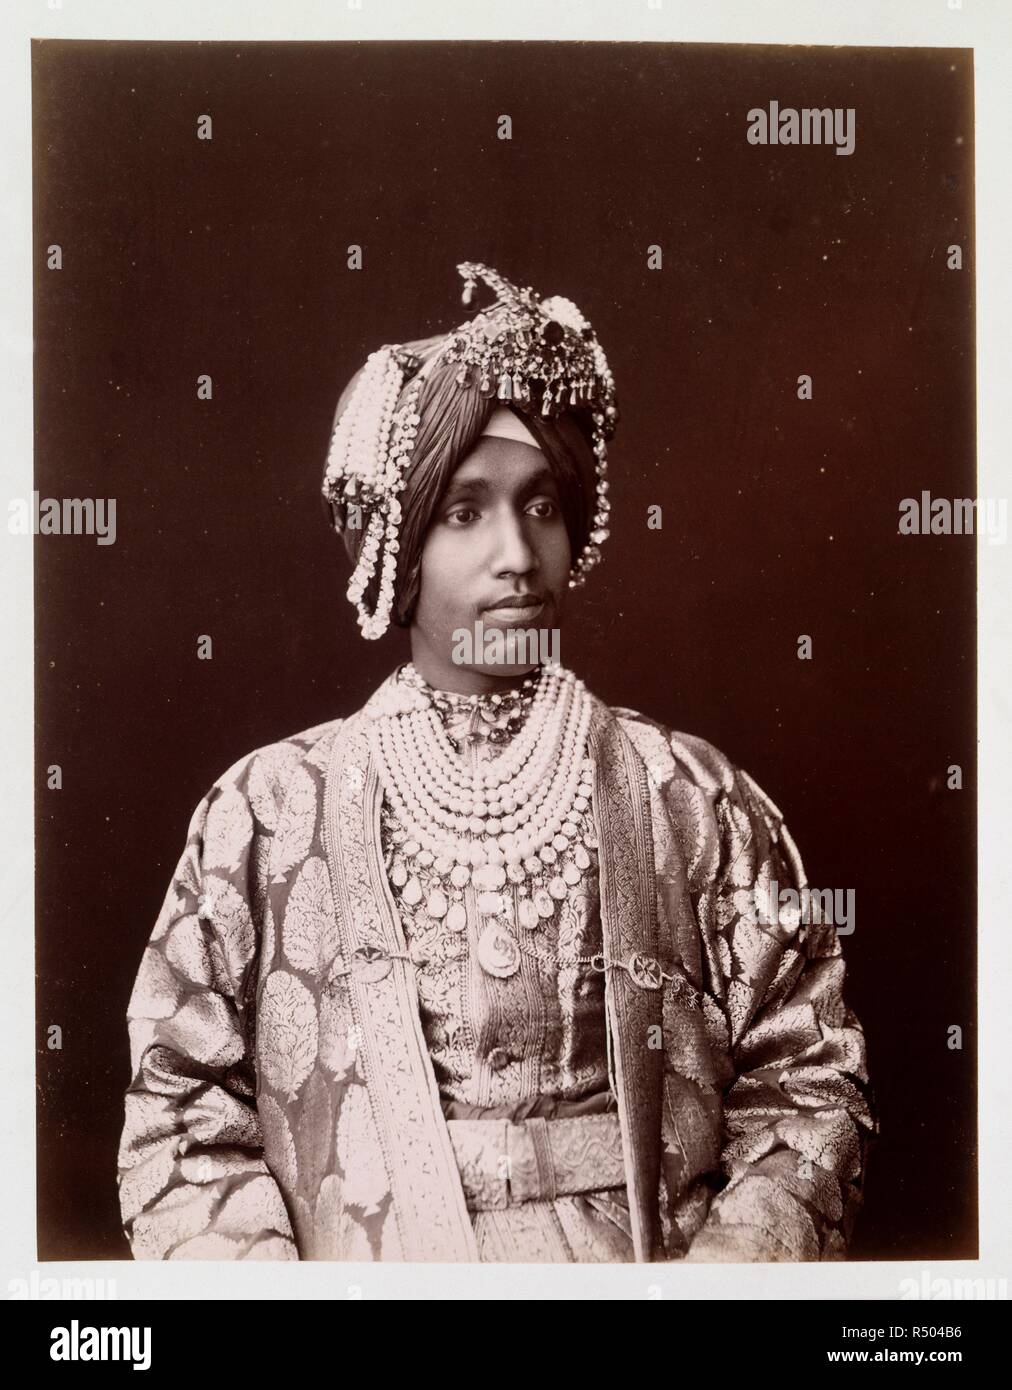 Maharaja of Patiala. Album Of Portraits Of Indian And Nepalese Rulers. 1880s. A half-length portrait of Sir Rajendra Singh, Maharaja of Patiala.  Image taken from Album Of Portraits Of Indian And Nepalese Rulers.  Originally published/produced in 1880s. . Source: OIOC Photo 209/(5),. Stock Photo